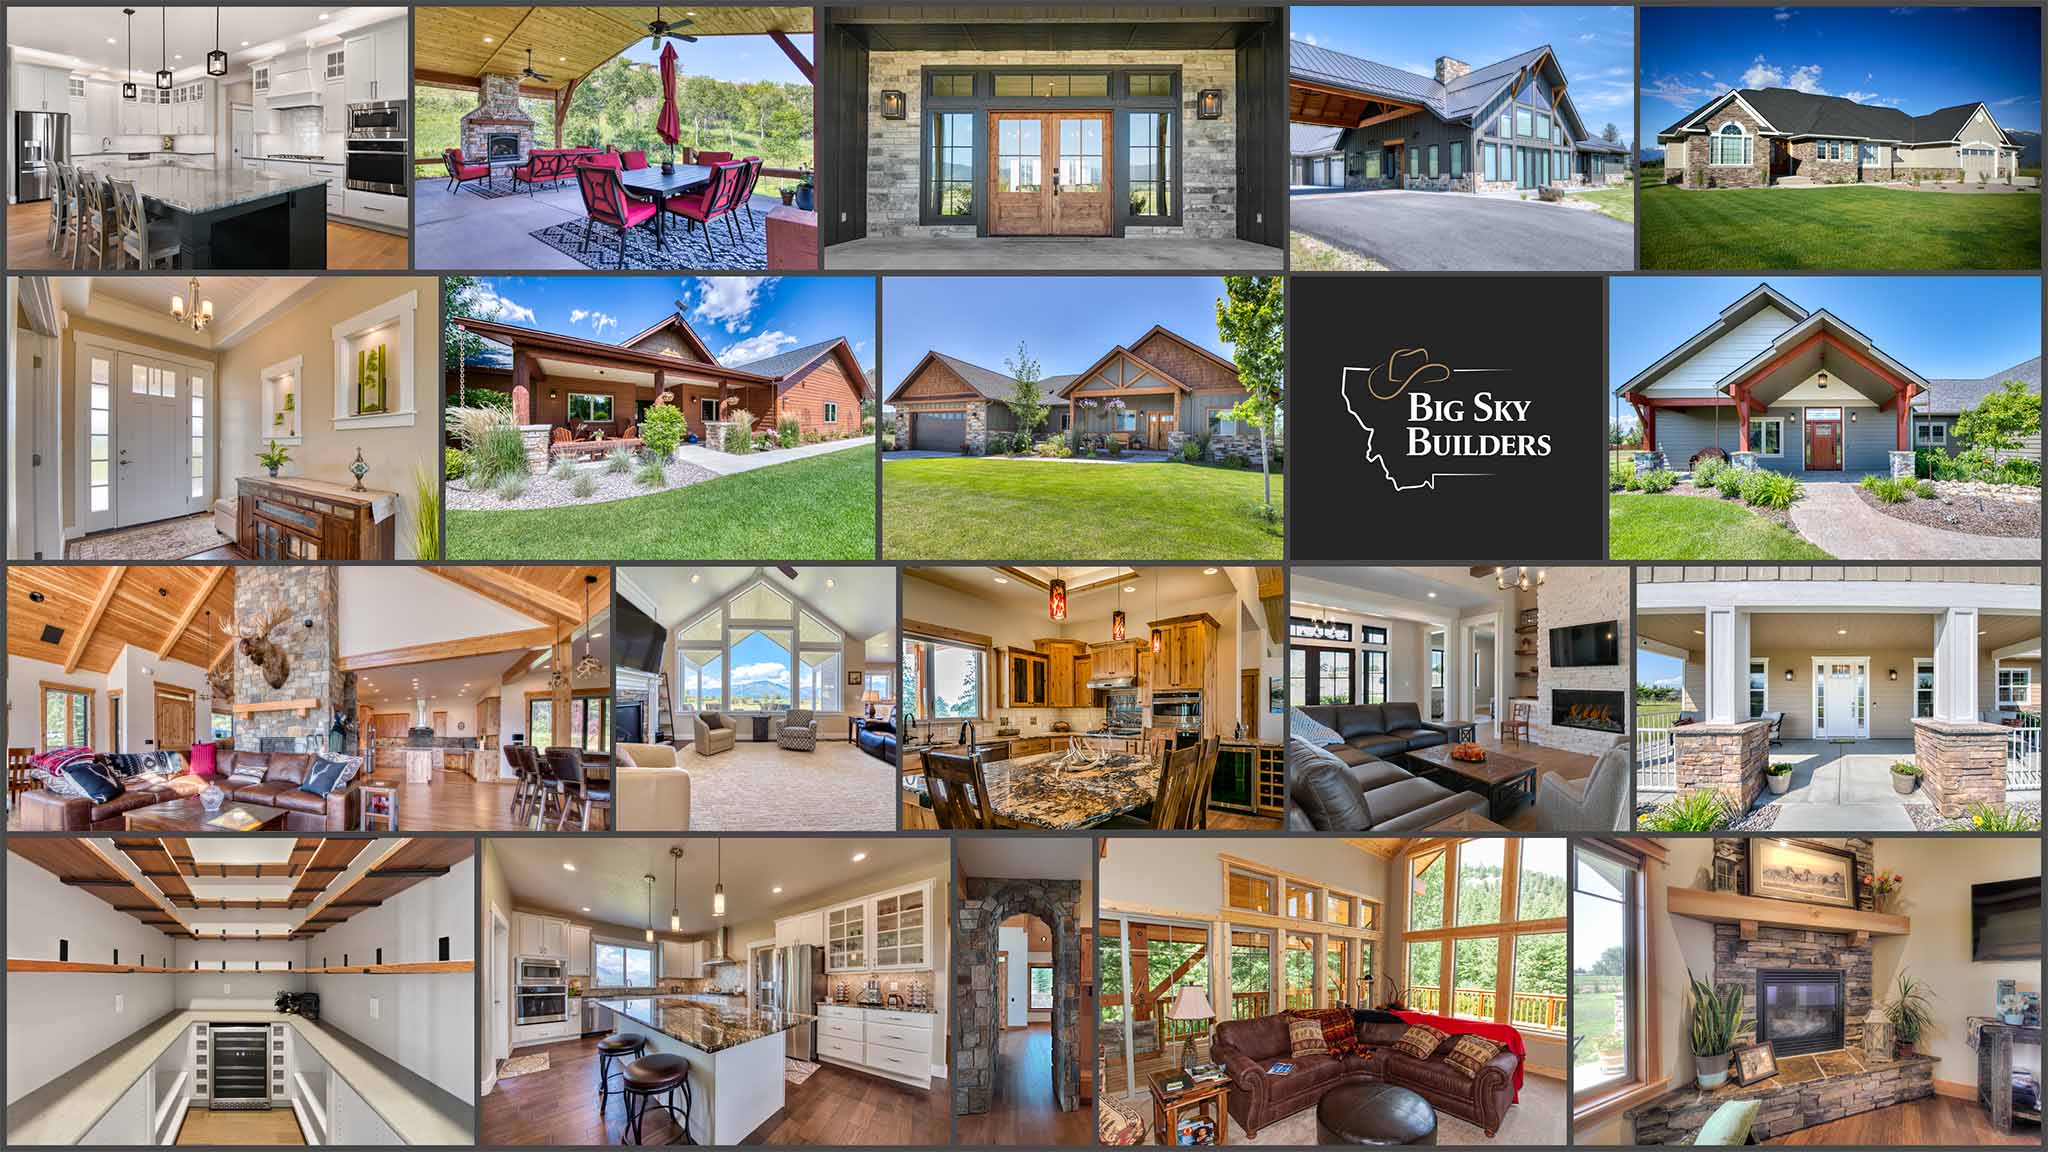 Photo Collage of homes built by Big Sky Builders of Montana in the Bitterroot Valley